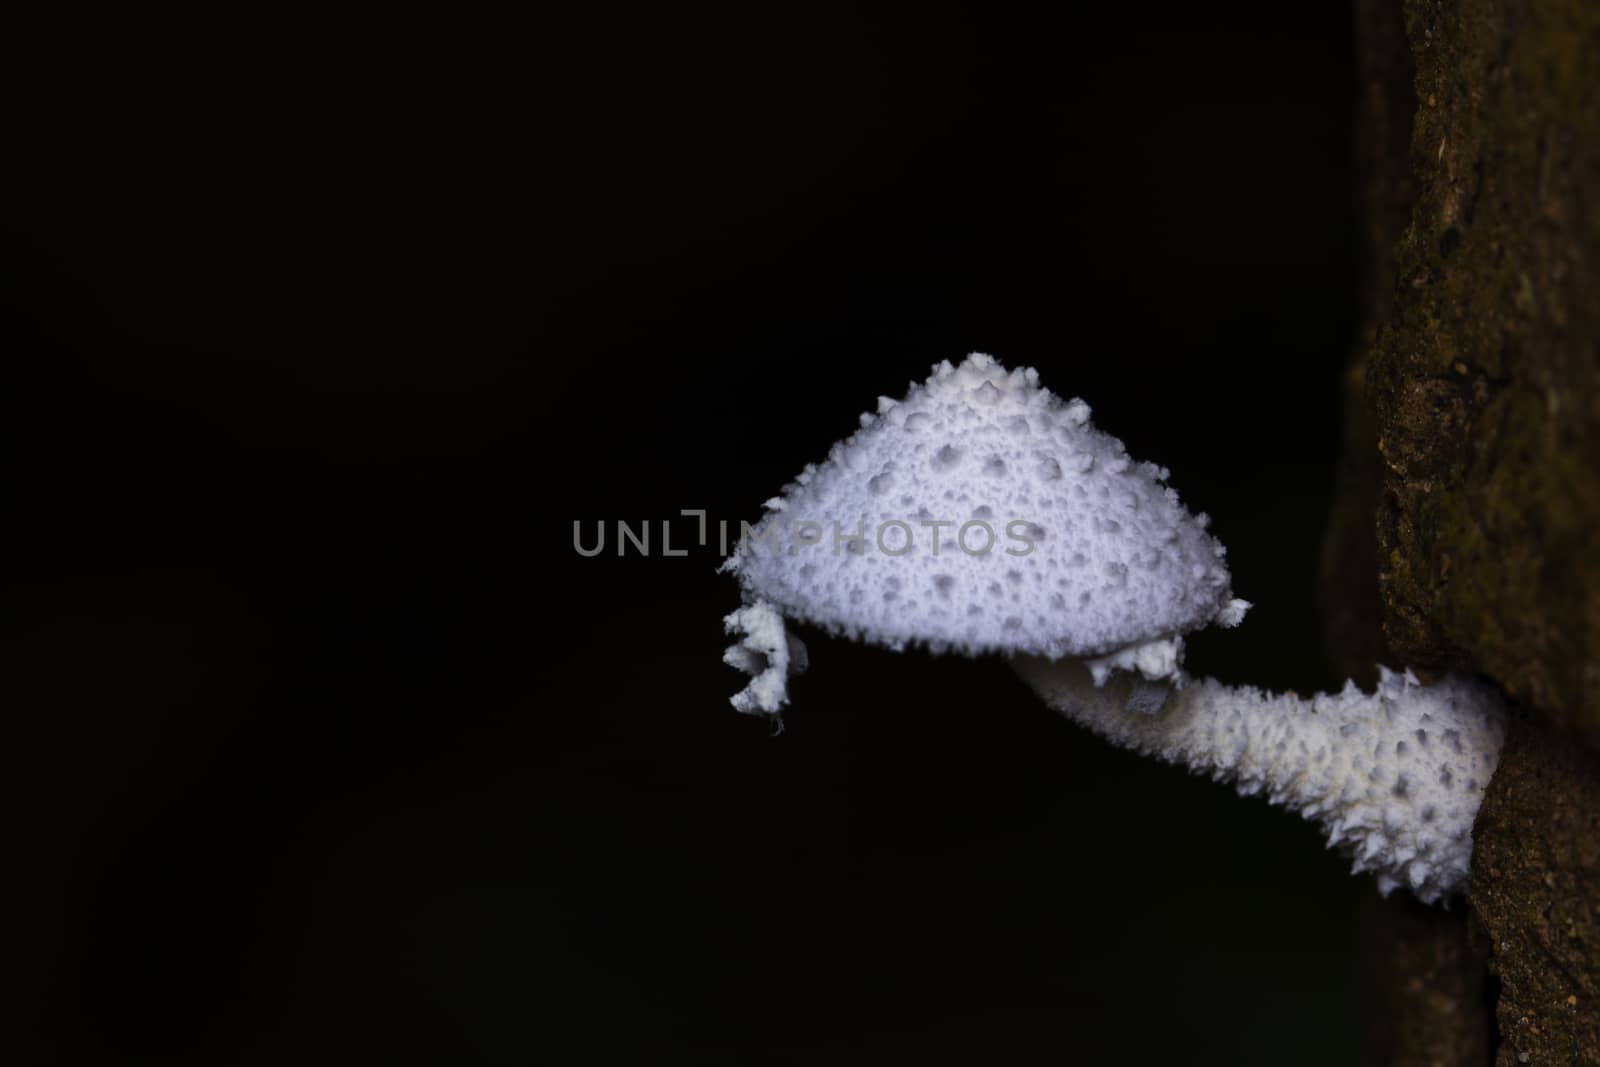 White mushroom growing up on the tree with black background